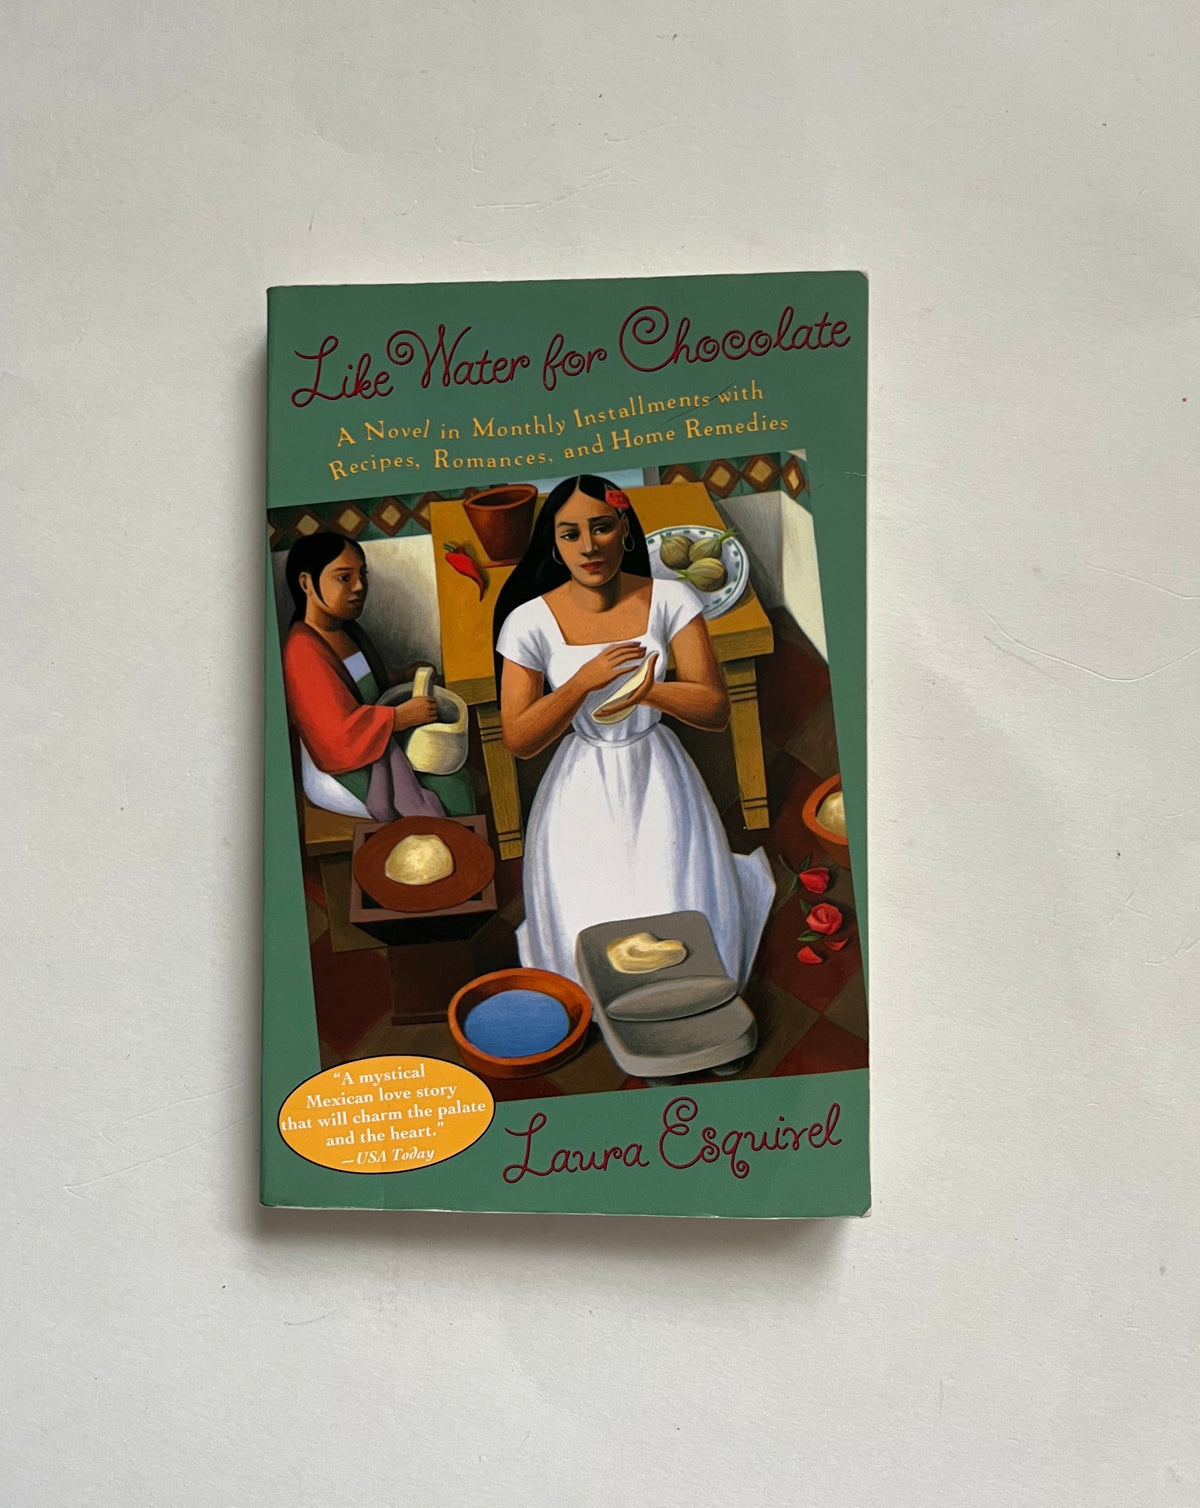 Like Water for Chocolate by Laura Esquirel